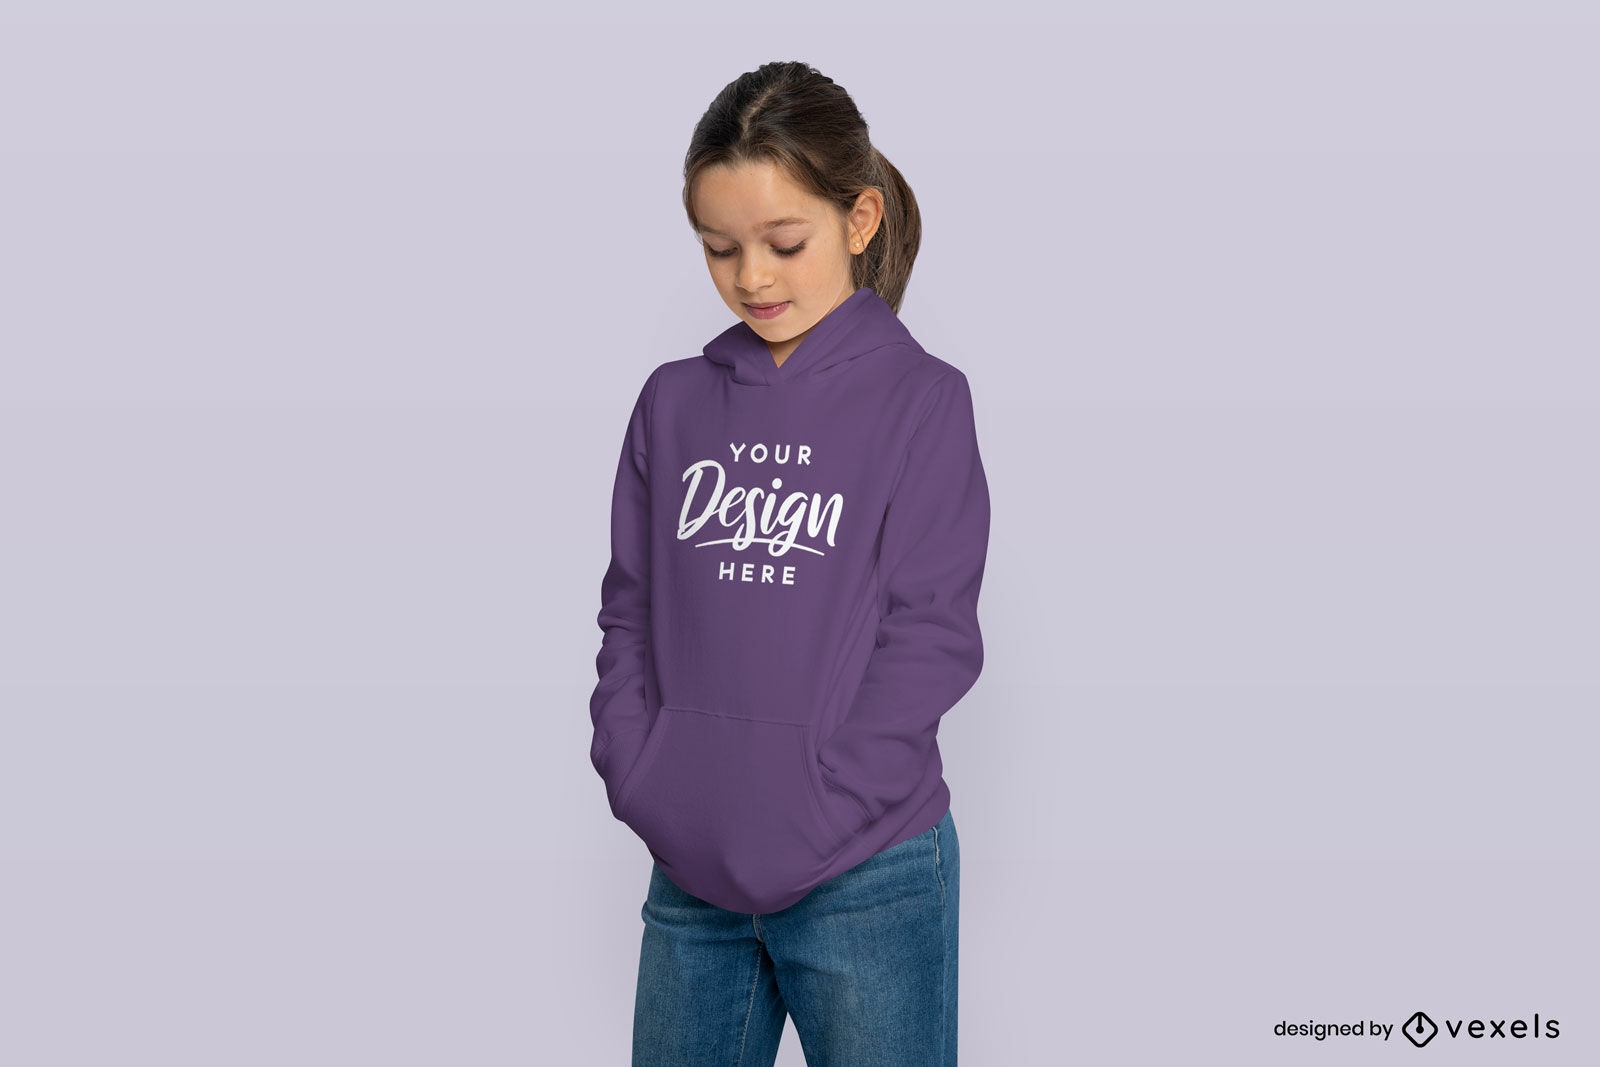 Girl child in hoodie and solid background mockup